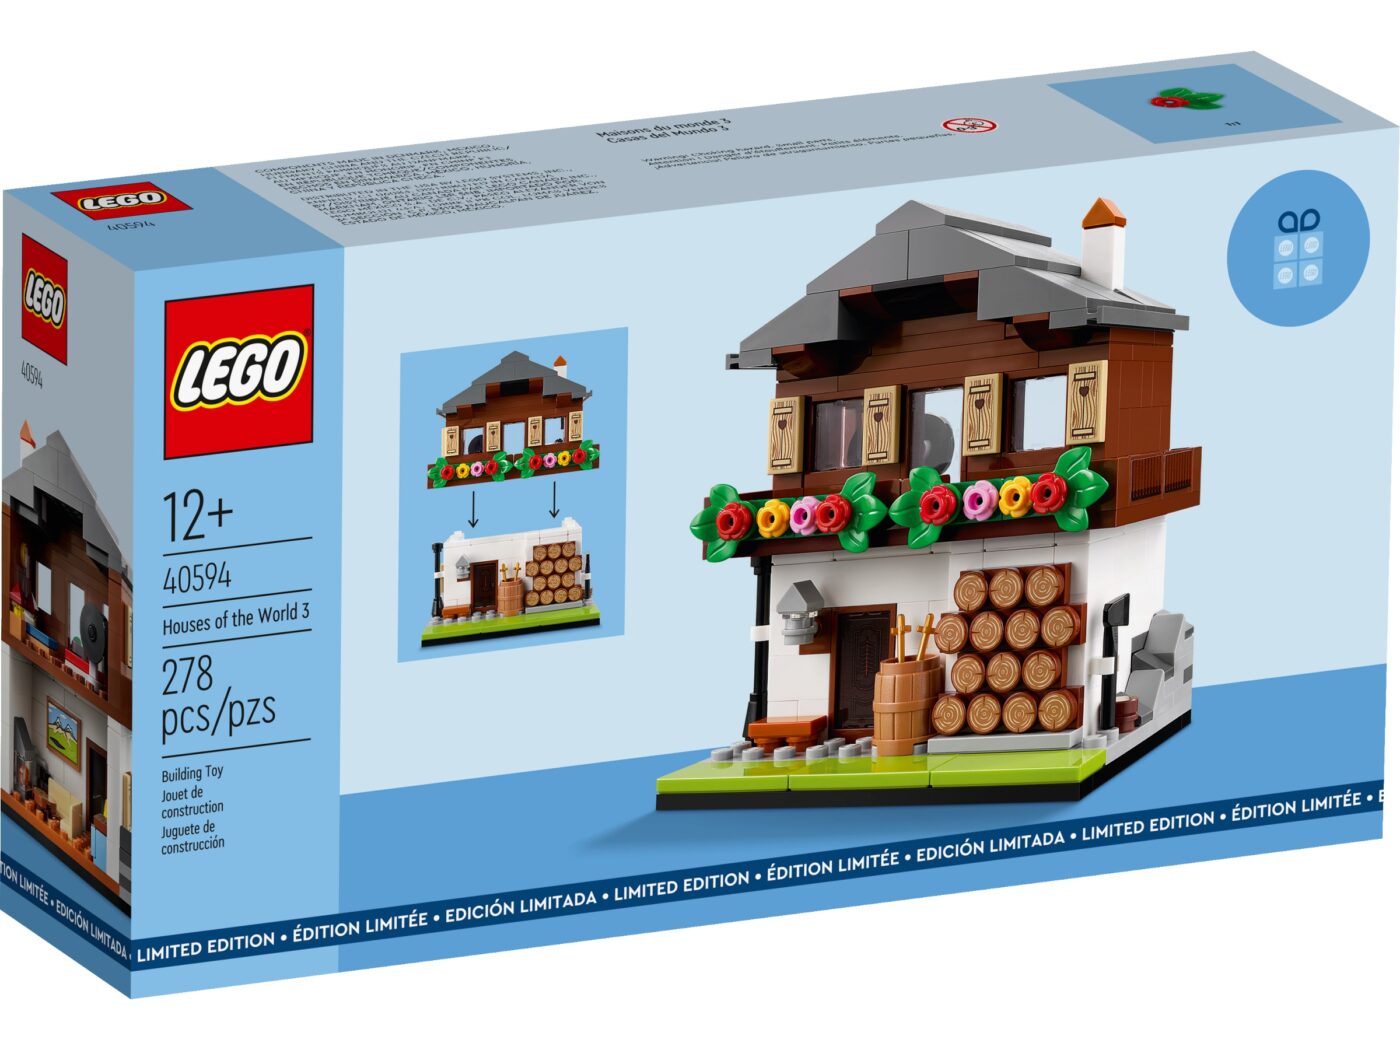 Confirmed: LEGO Houses of the World 3 gift with purchase (GWP) is available from 11 August9